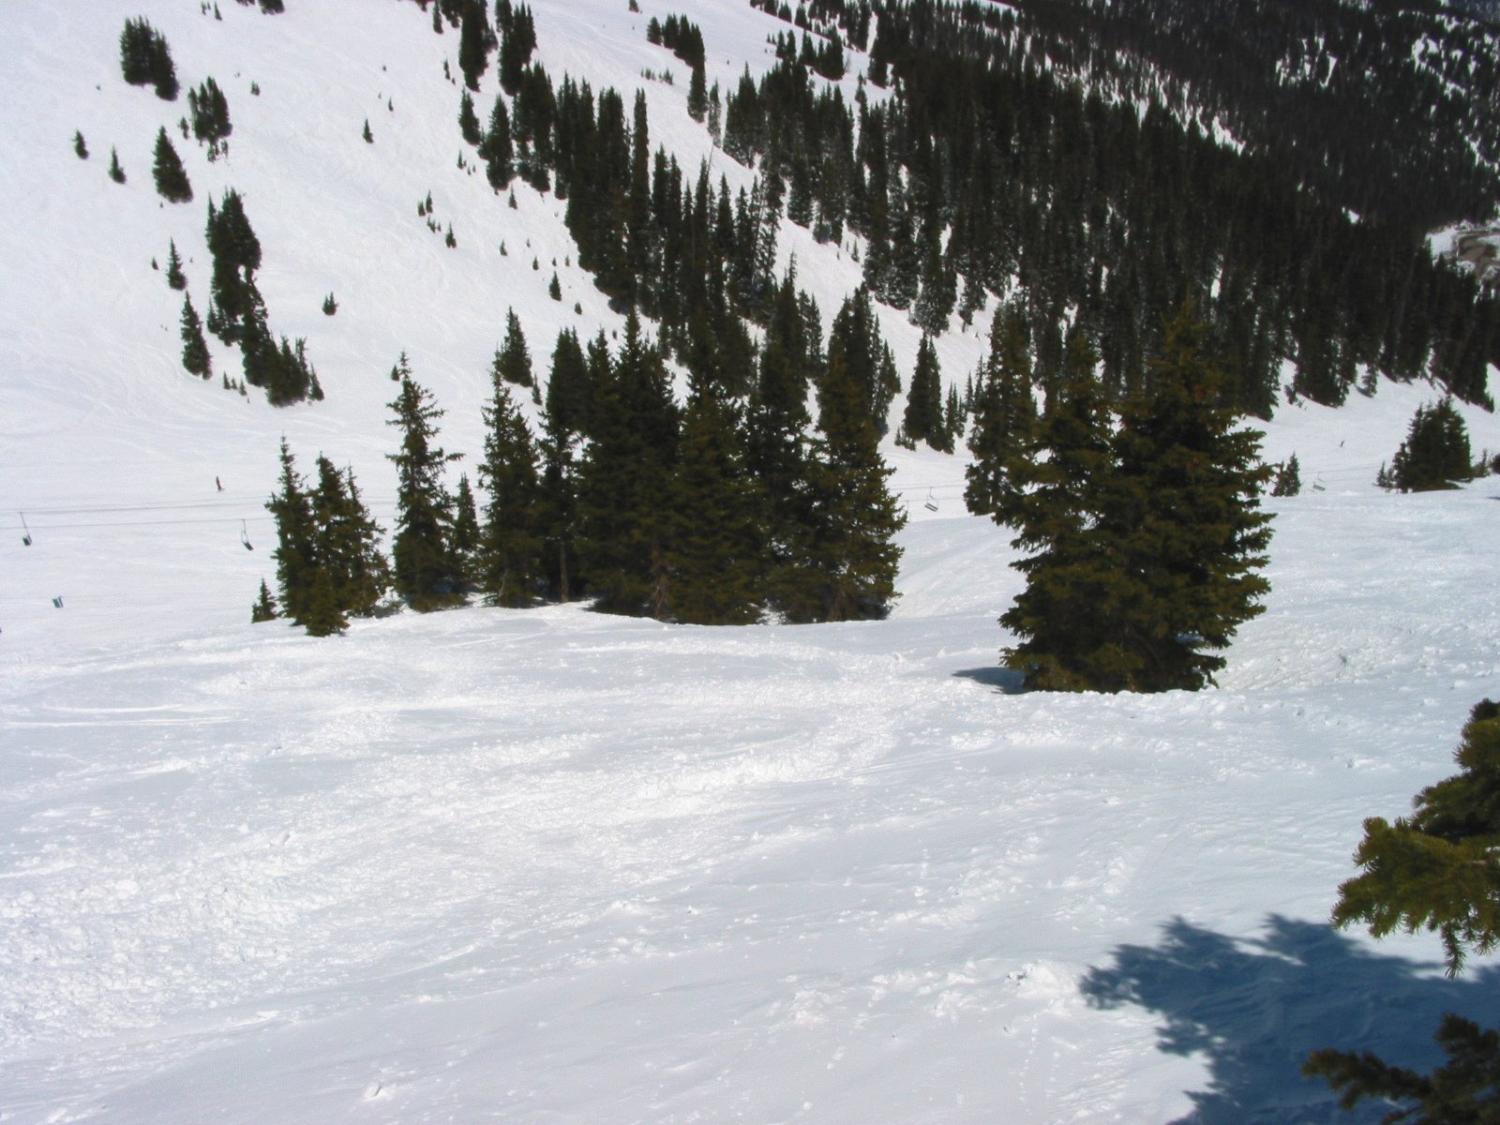 Looking down South Chutes from the western end of the run